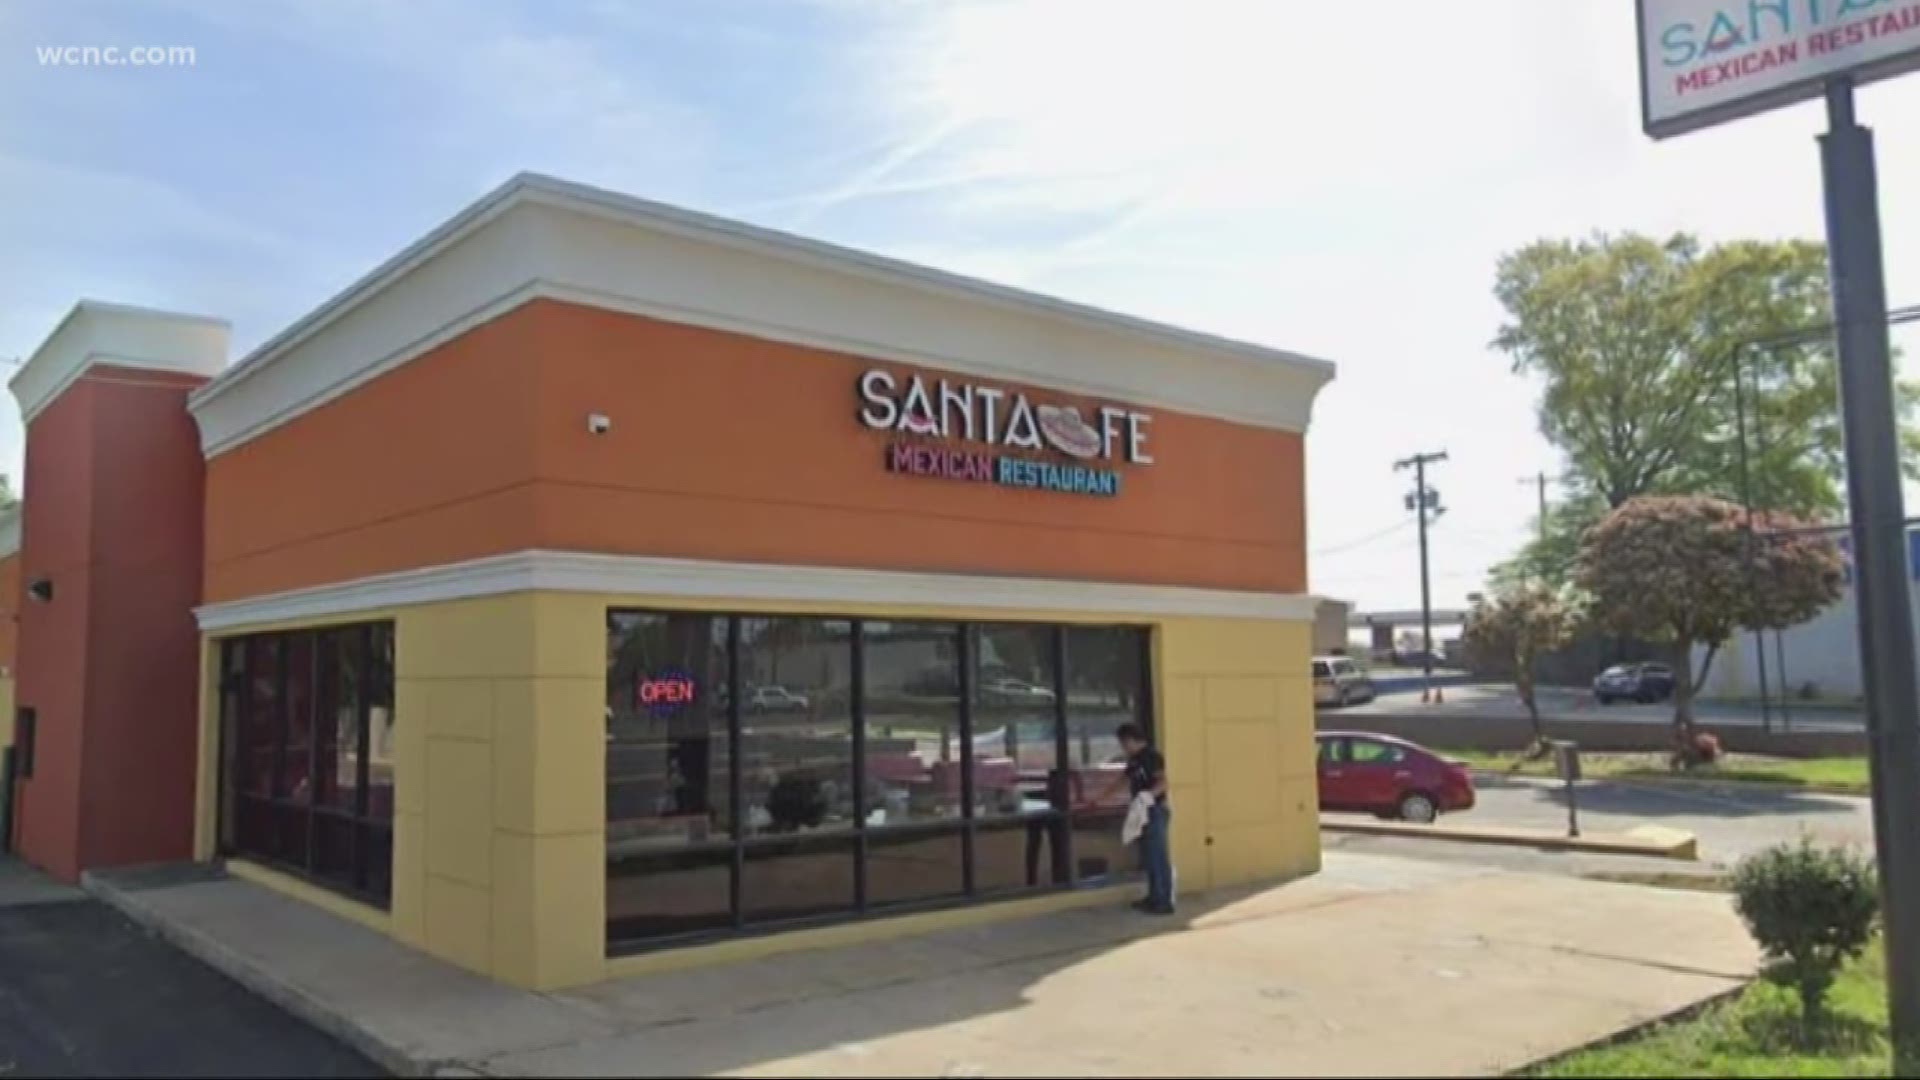 An employee at the Santa Fe Mexican Restaurant on Central Avenue was spotted "elbow deep" stirring beans while the health inspector was present. Which raises the question. What do they do when the inspector isn't there?